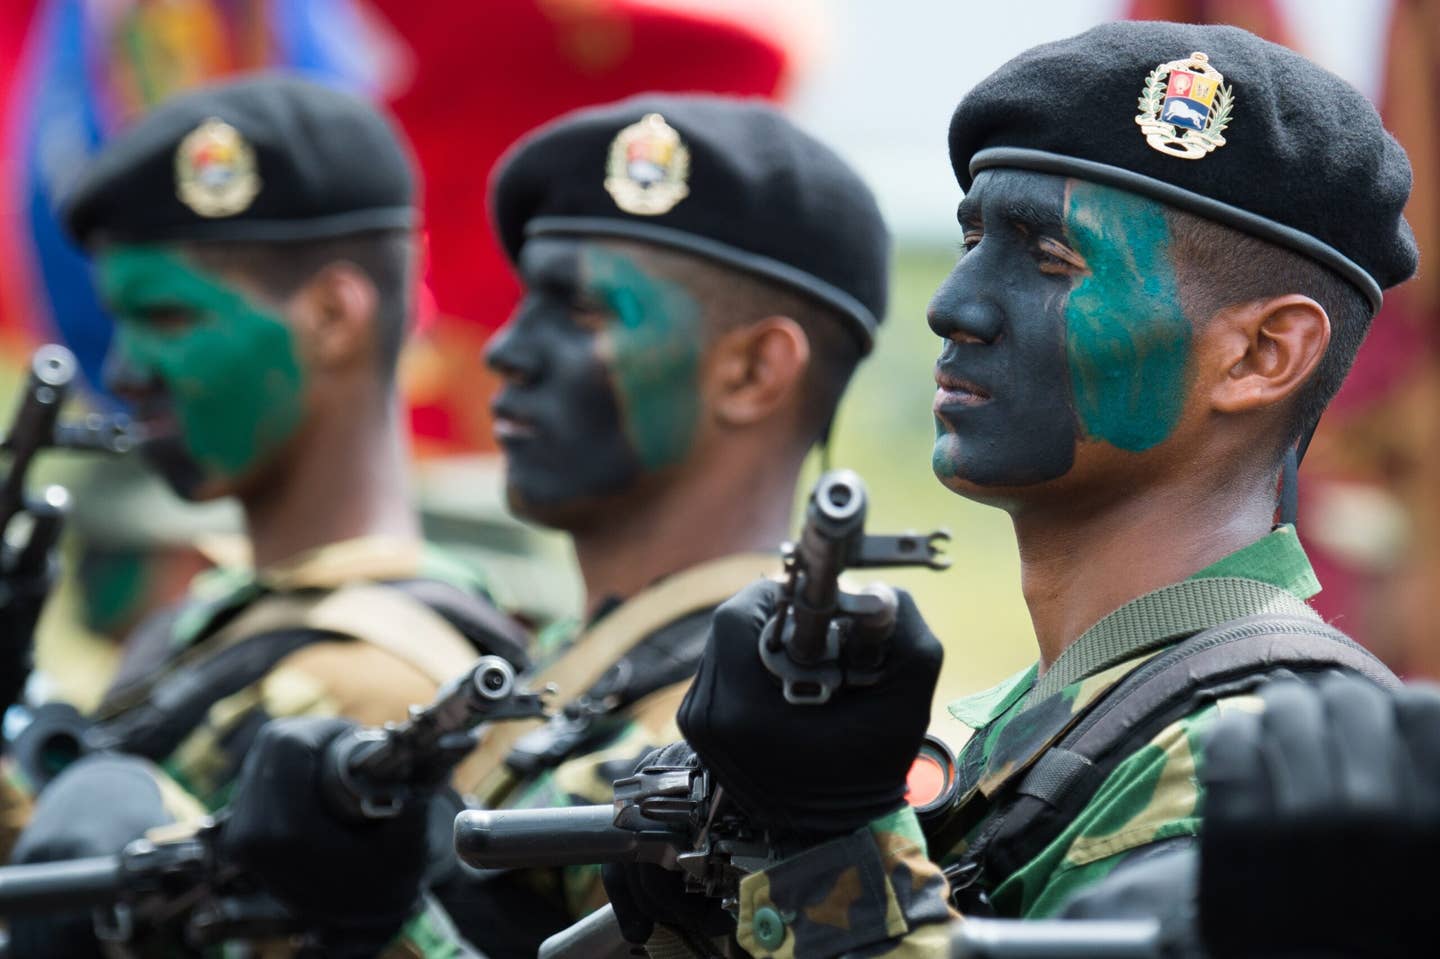 Members of the Venezuelan Army take part in a military parade in Tumeremo, Bolivar State, in Venezuela, not far from the border with Guyana, on July 21, 2015. <em>FEDERICO PARRA/AFP via Getty Images</em>